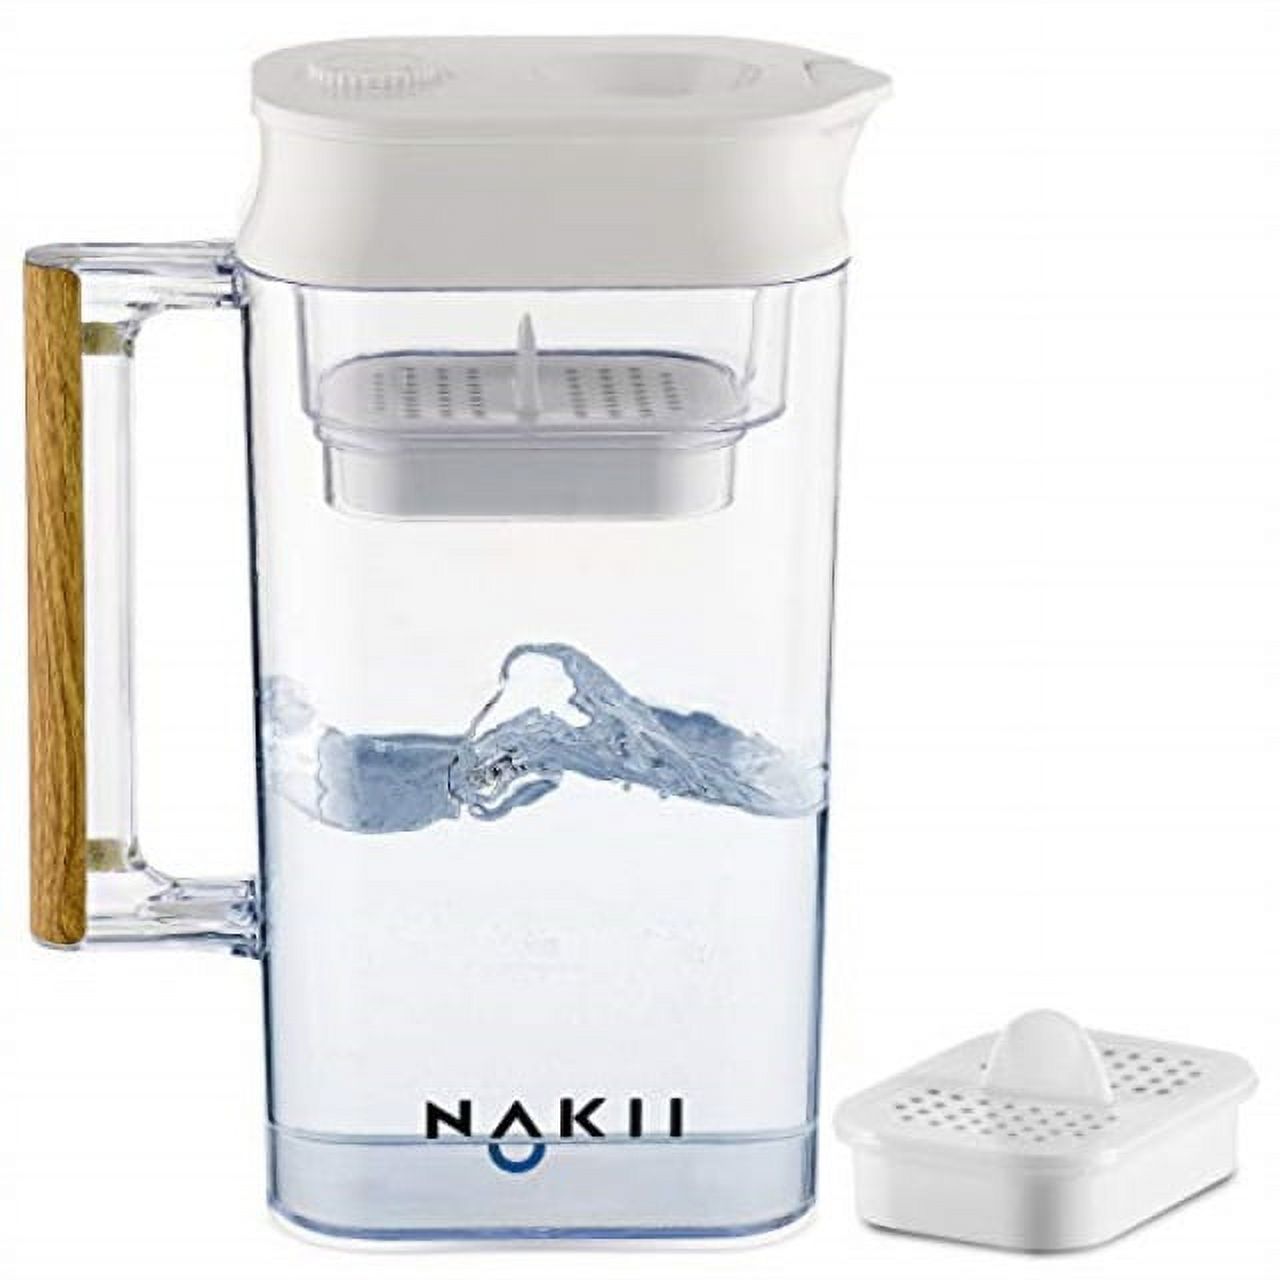 Nakii Water Filter Pitcher - Long Lasting Supreme Fast Filtration Purification Technology, Removes Chlorine, Fluoride Clean Tasting Water, Certified, - image 1 of 6